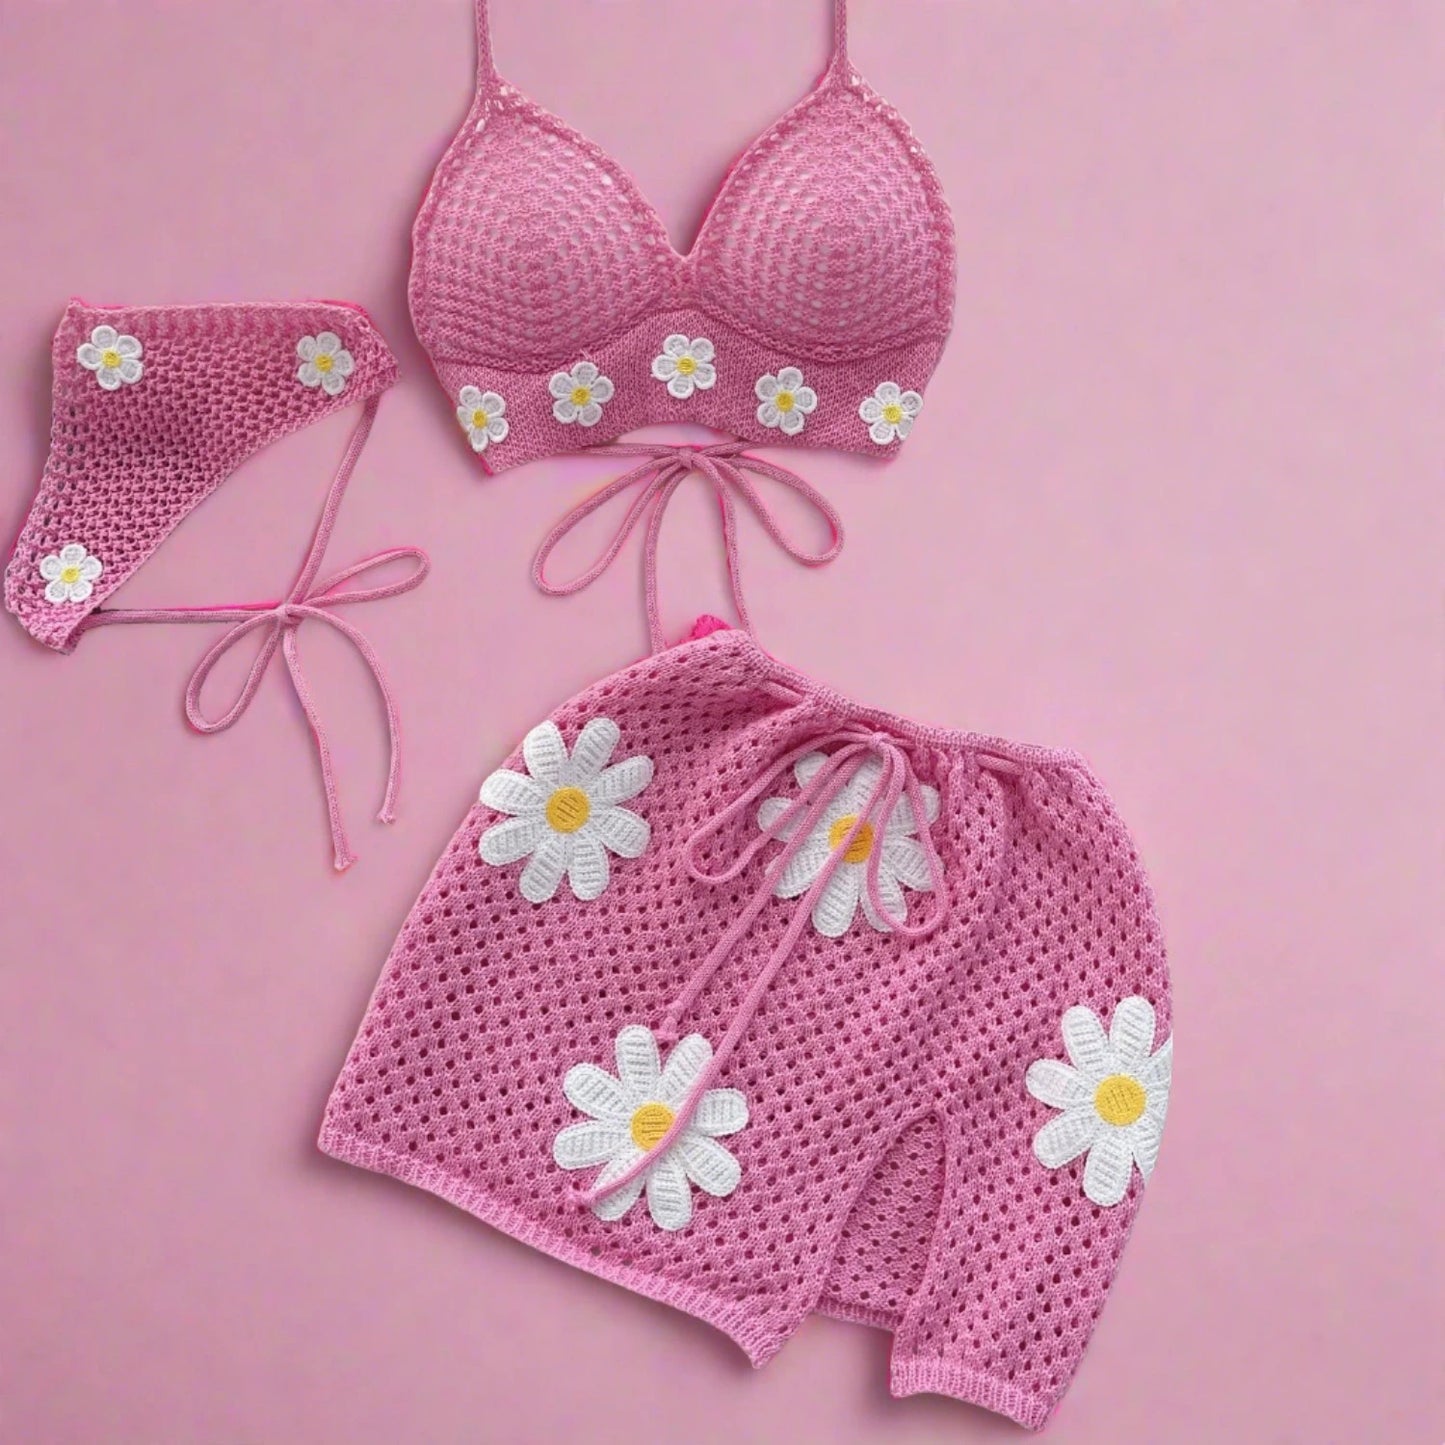 Pink outfit set with floral pattern